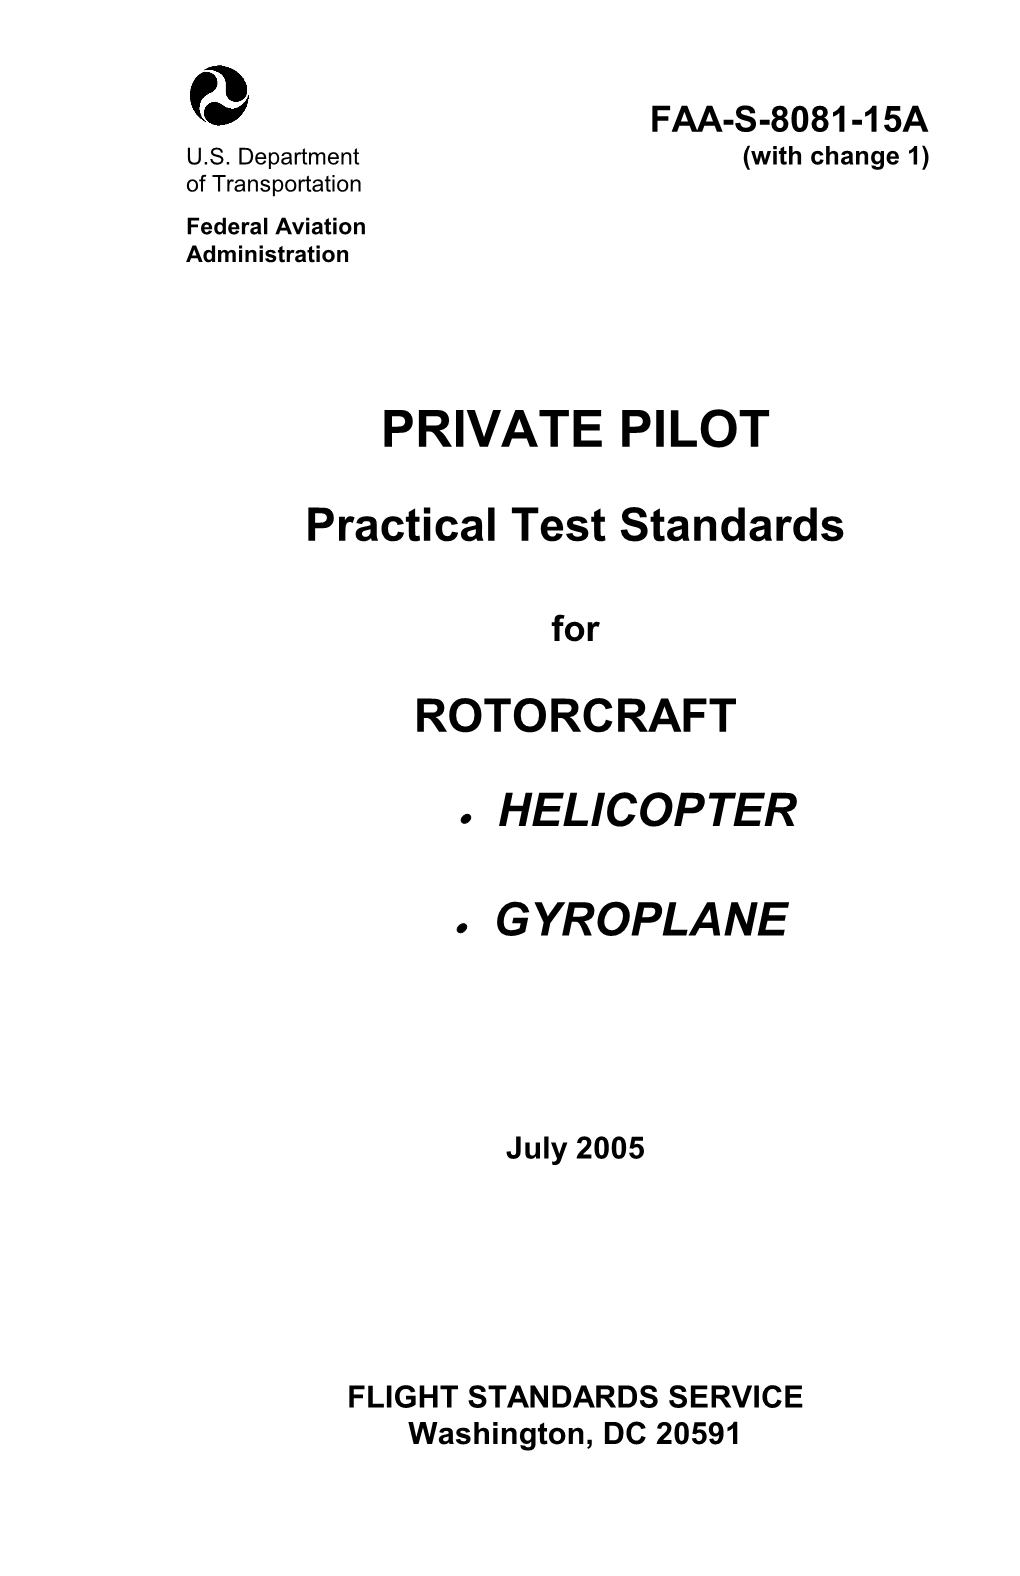 Private Pilot Practical Test Standards for Rotorcraft